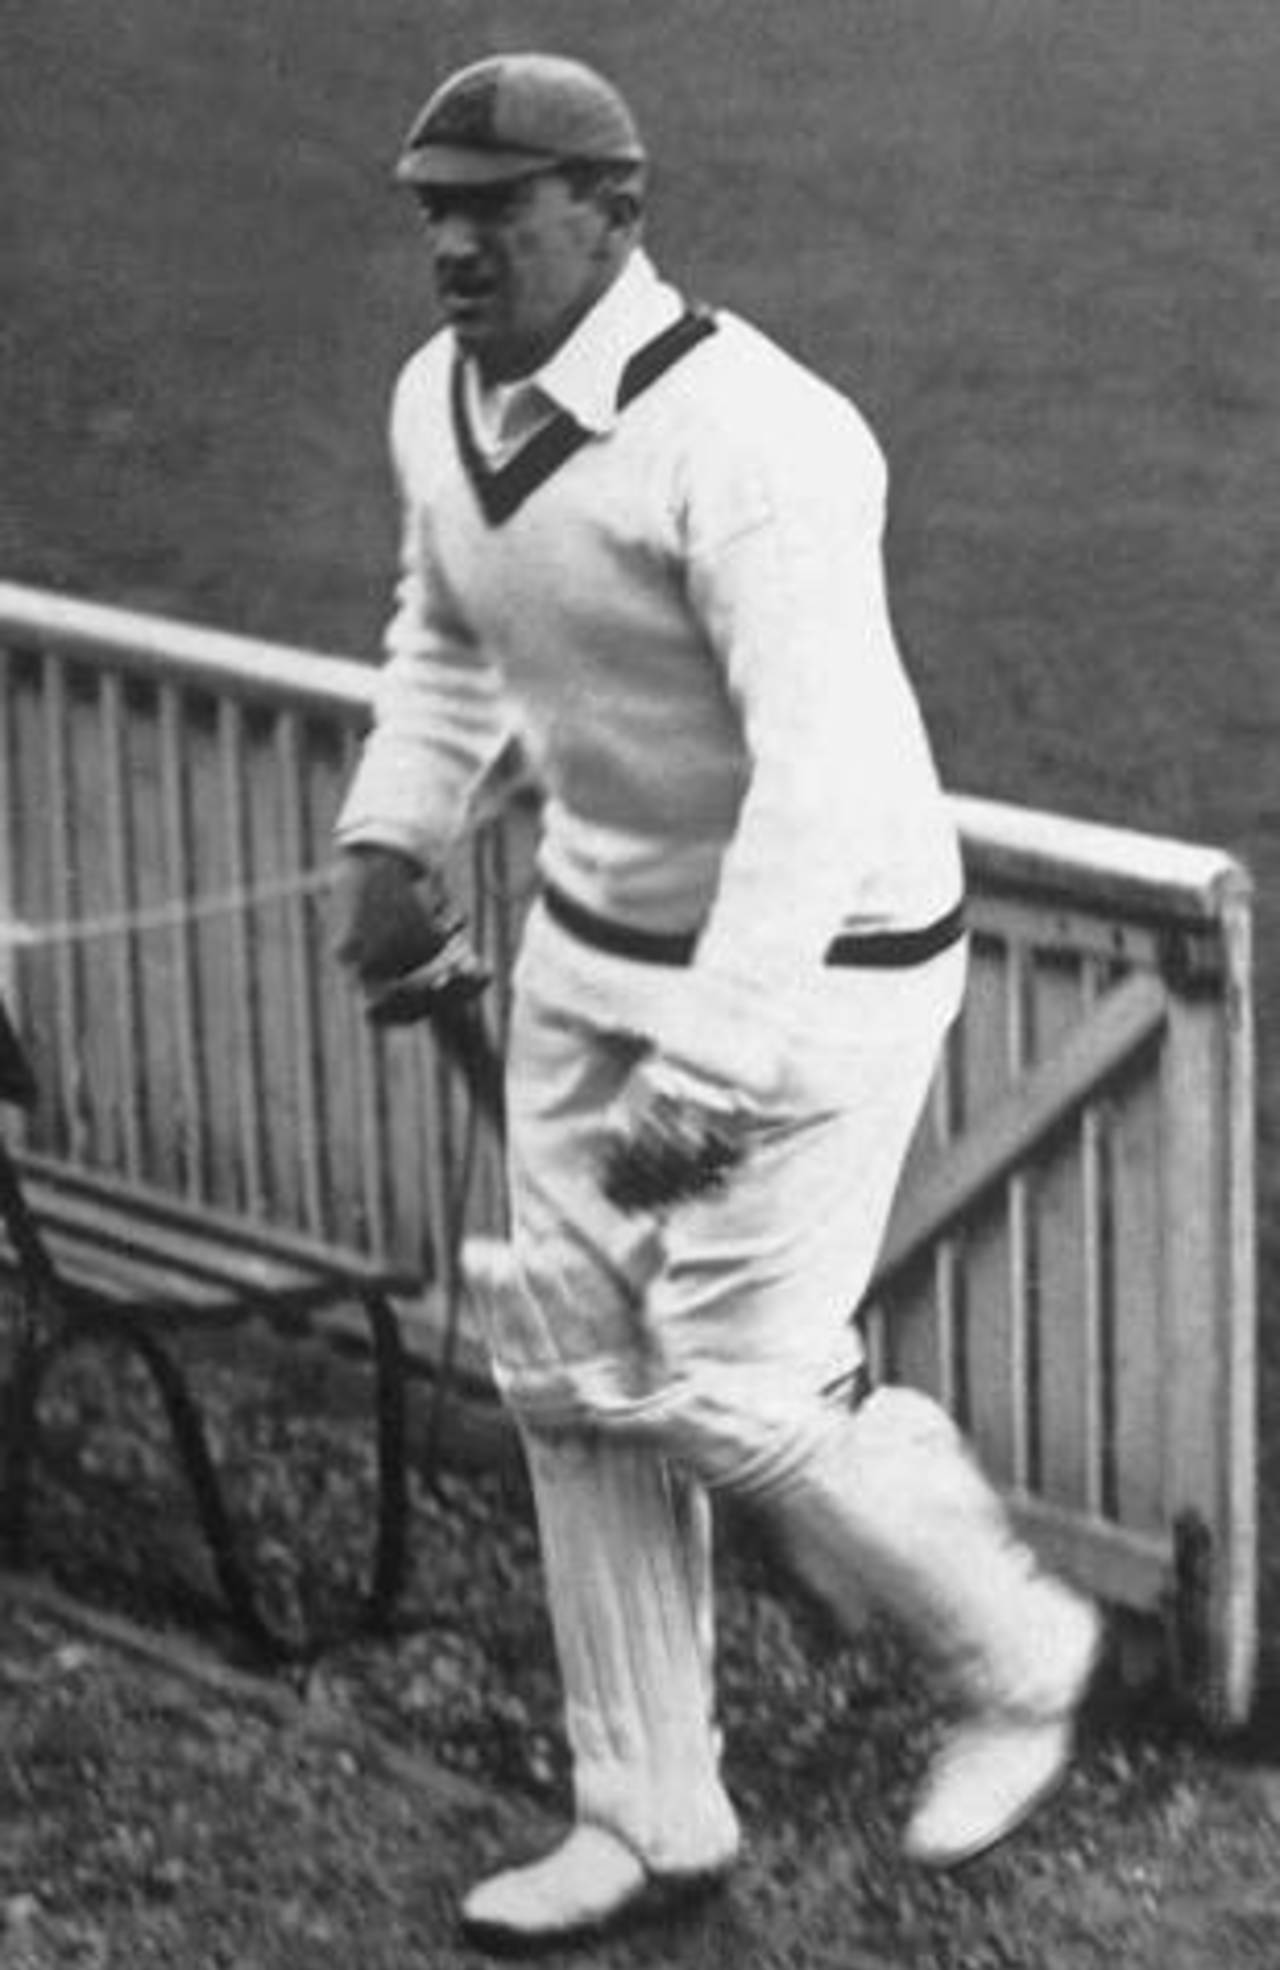 Aubrey Faulkner could choose on any given day to be regarded as South Africa's most brilliant batsman or most deadly bowler&nbsp;&nbsp;&bull;&nbsp;&nbsp;The Cricketer International